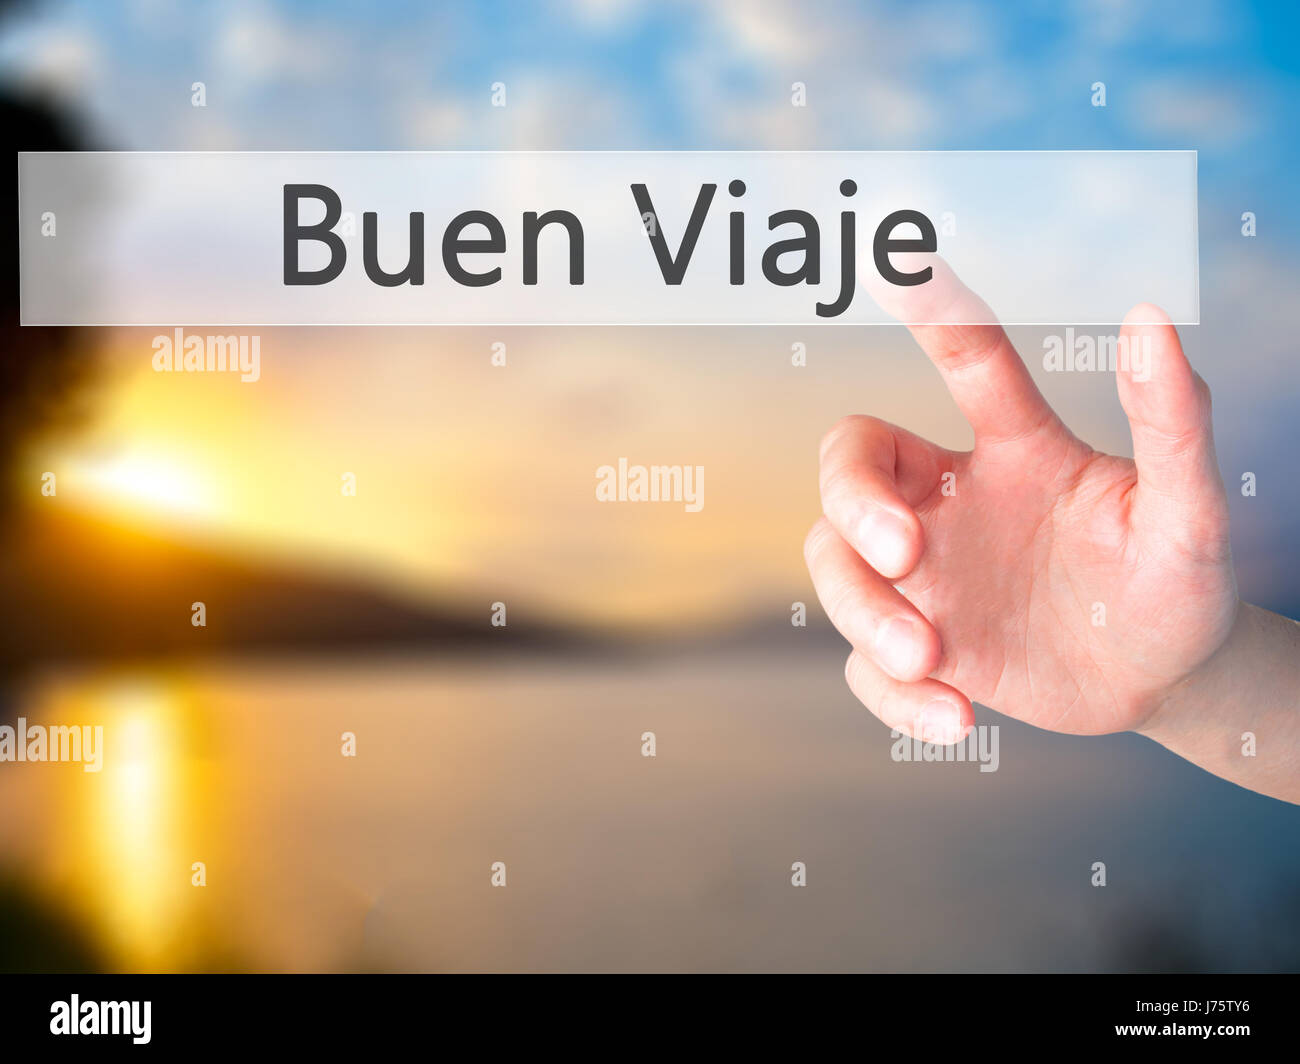 Buen Viaje (Good Trip in Spanish) - Hand pressing a button on blurred background concept . Business, technology, internet concept. Stock Photo Stock Photo